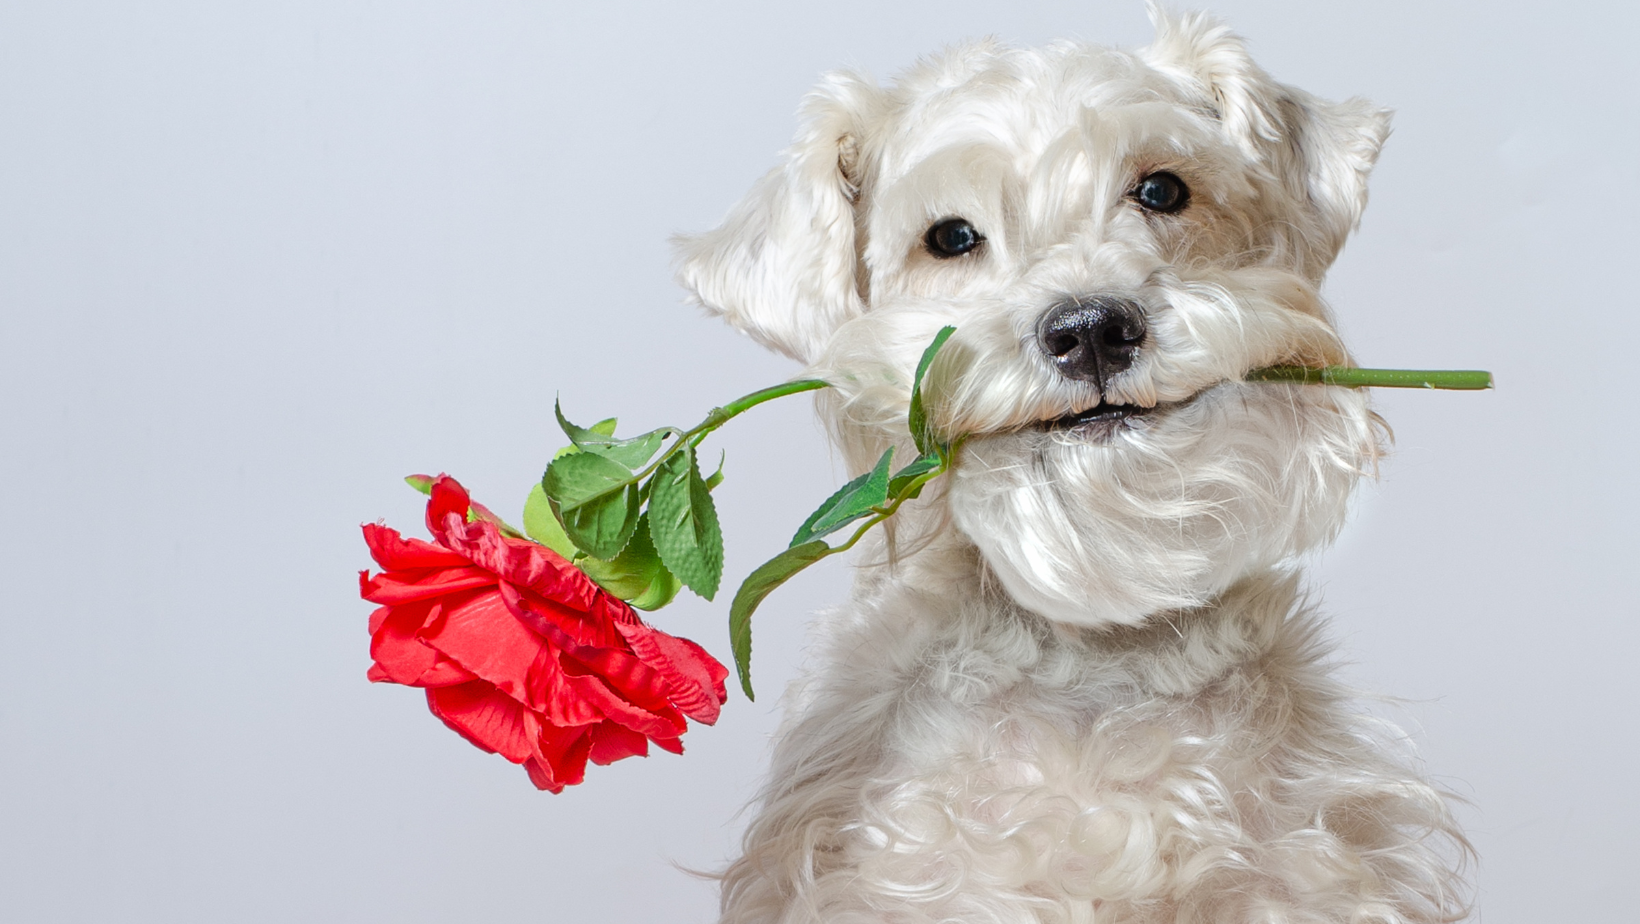 Broward County Animal Care Holds 'Stinky Ex' Fundraiser for Valentine's Day 5